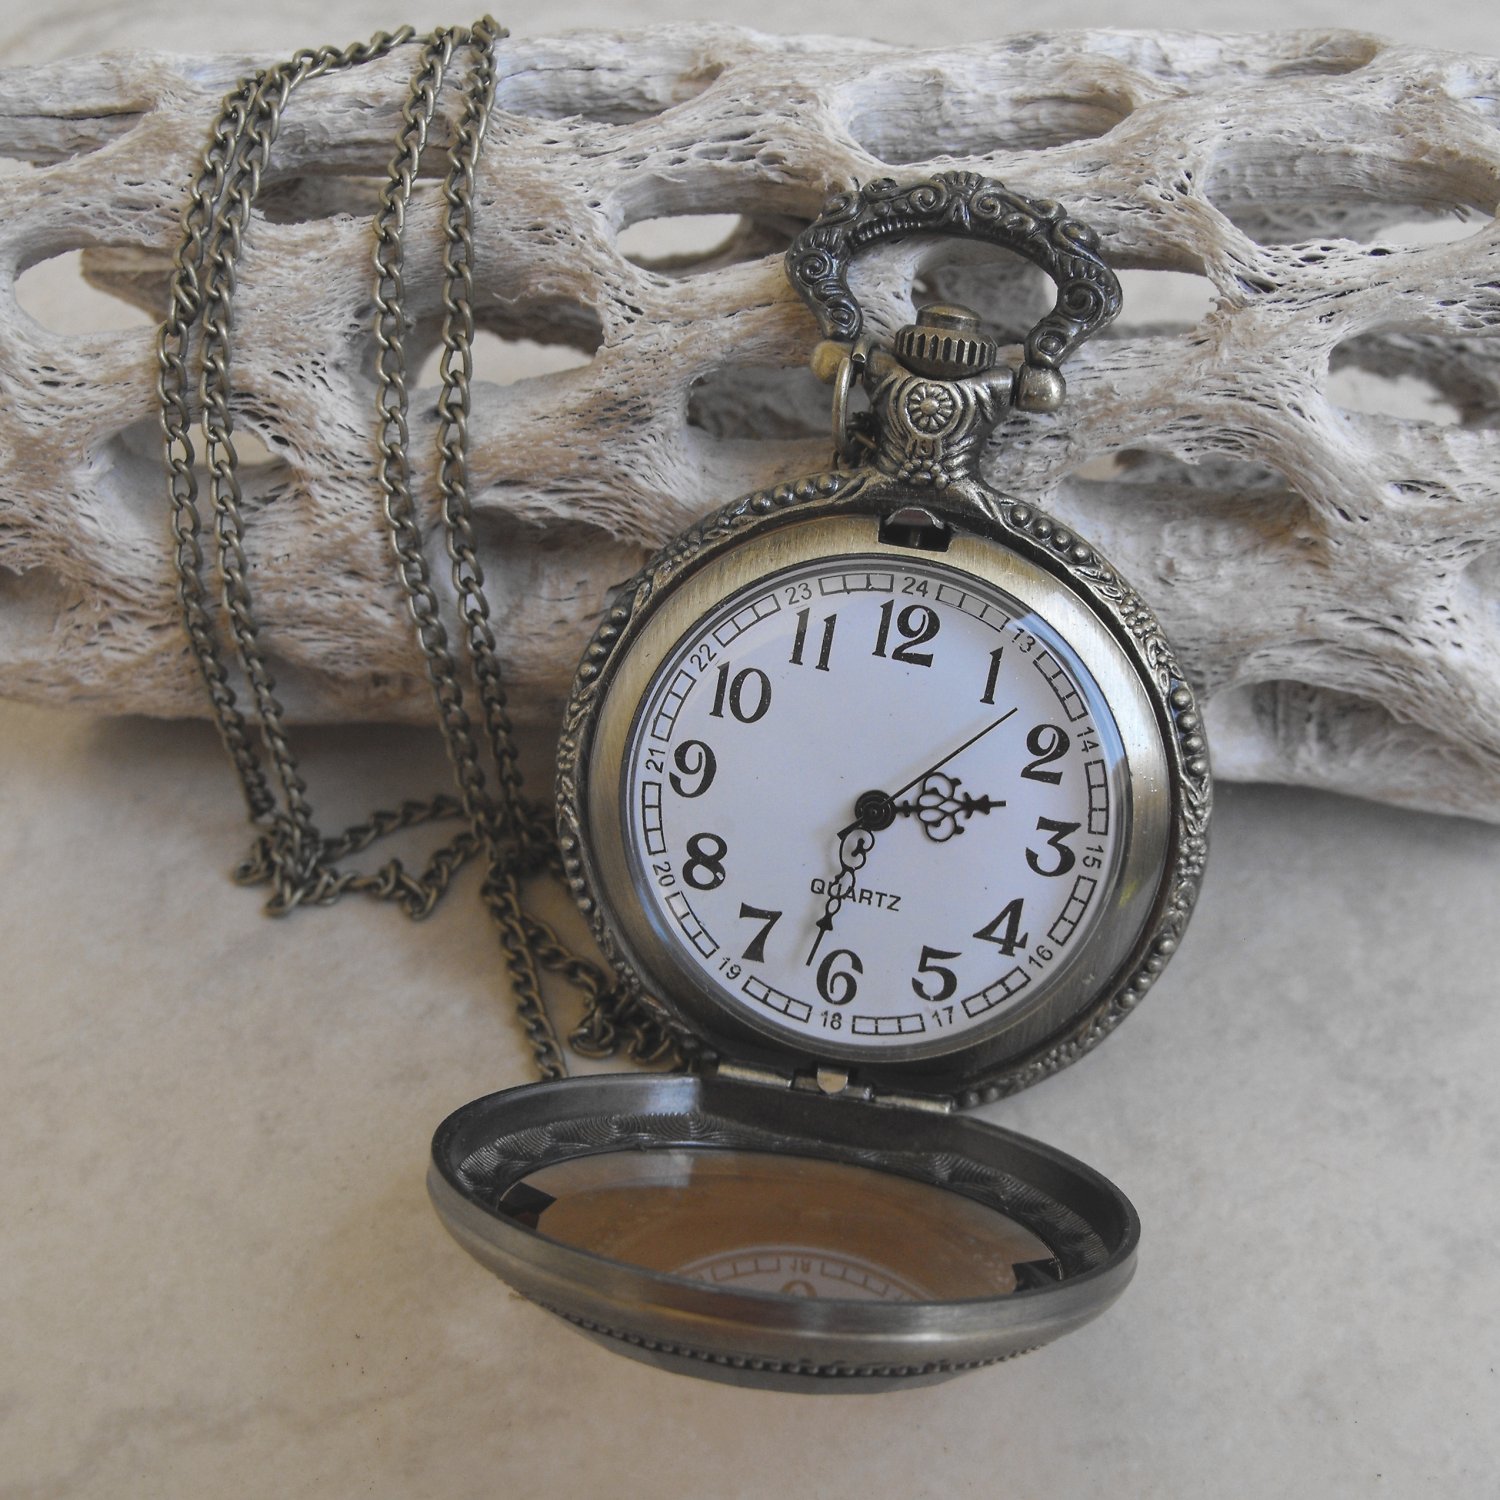 Beveled Glass Face Pocket Watch With Chain